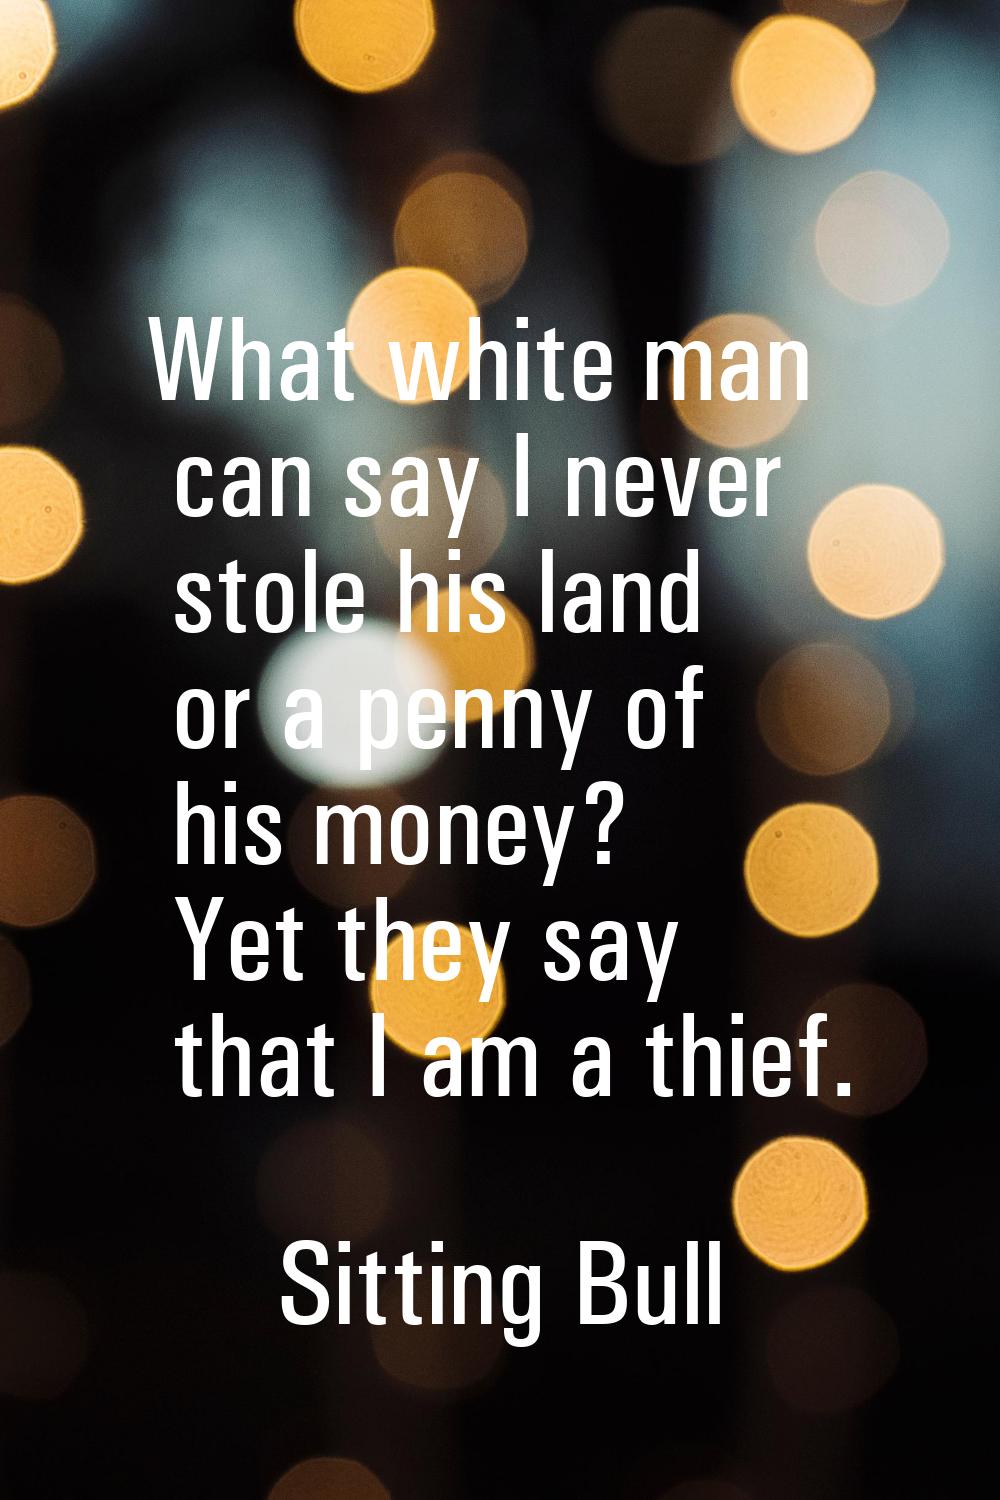 What white man can say I never stole his land or a penny of his money? Yet they say that I am a thi